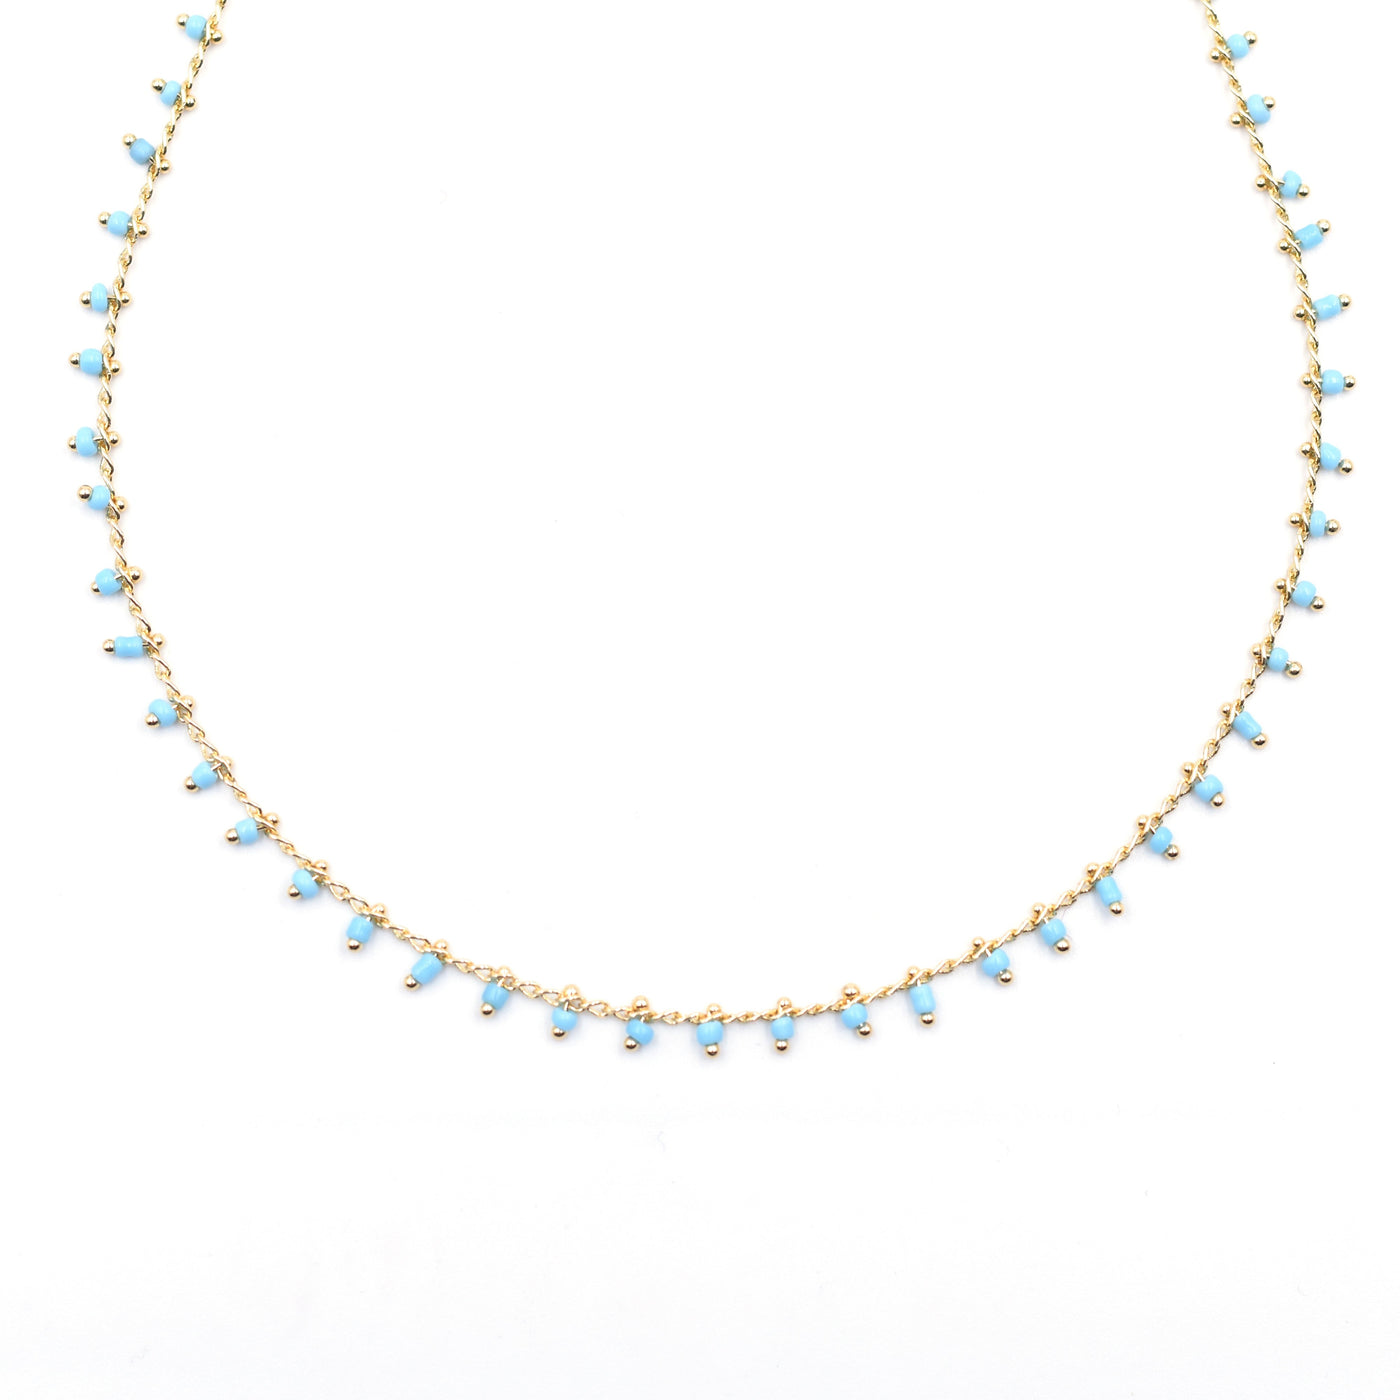 Topaz & Pearl Necklaces Turquoise Confetti Beaded Short Necklace